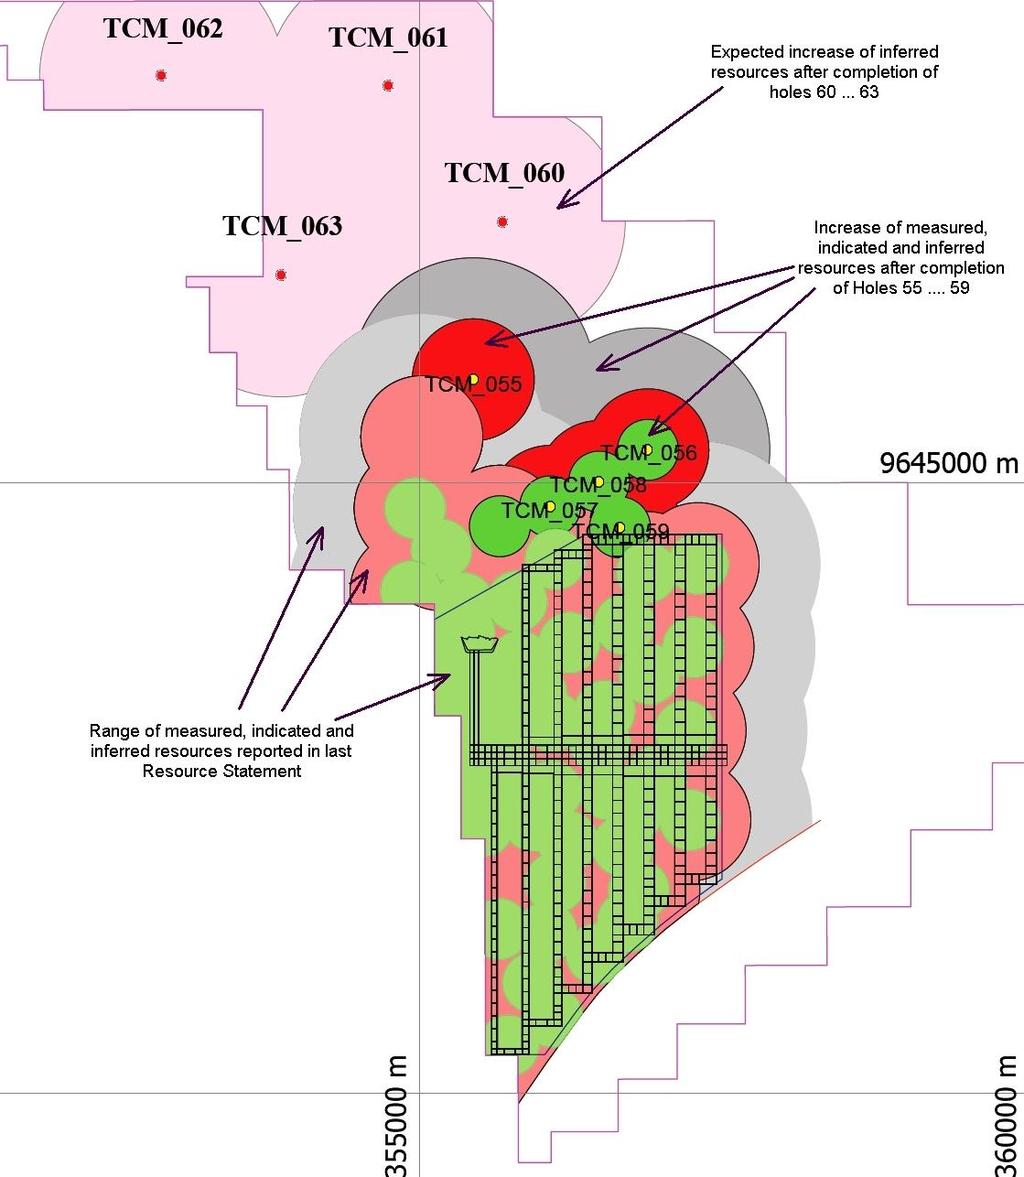 TCM Project - Drilling Feasibility Study based on Southern